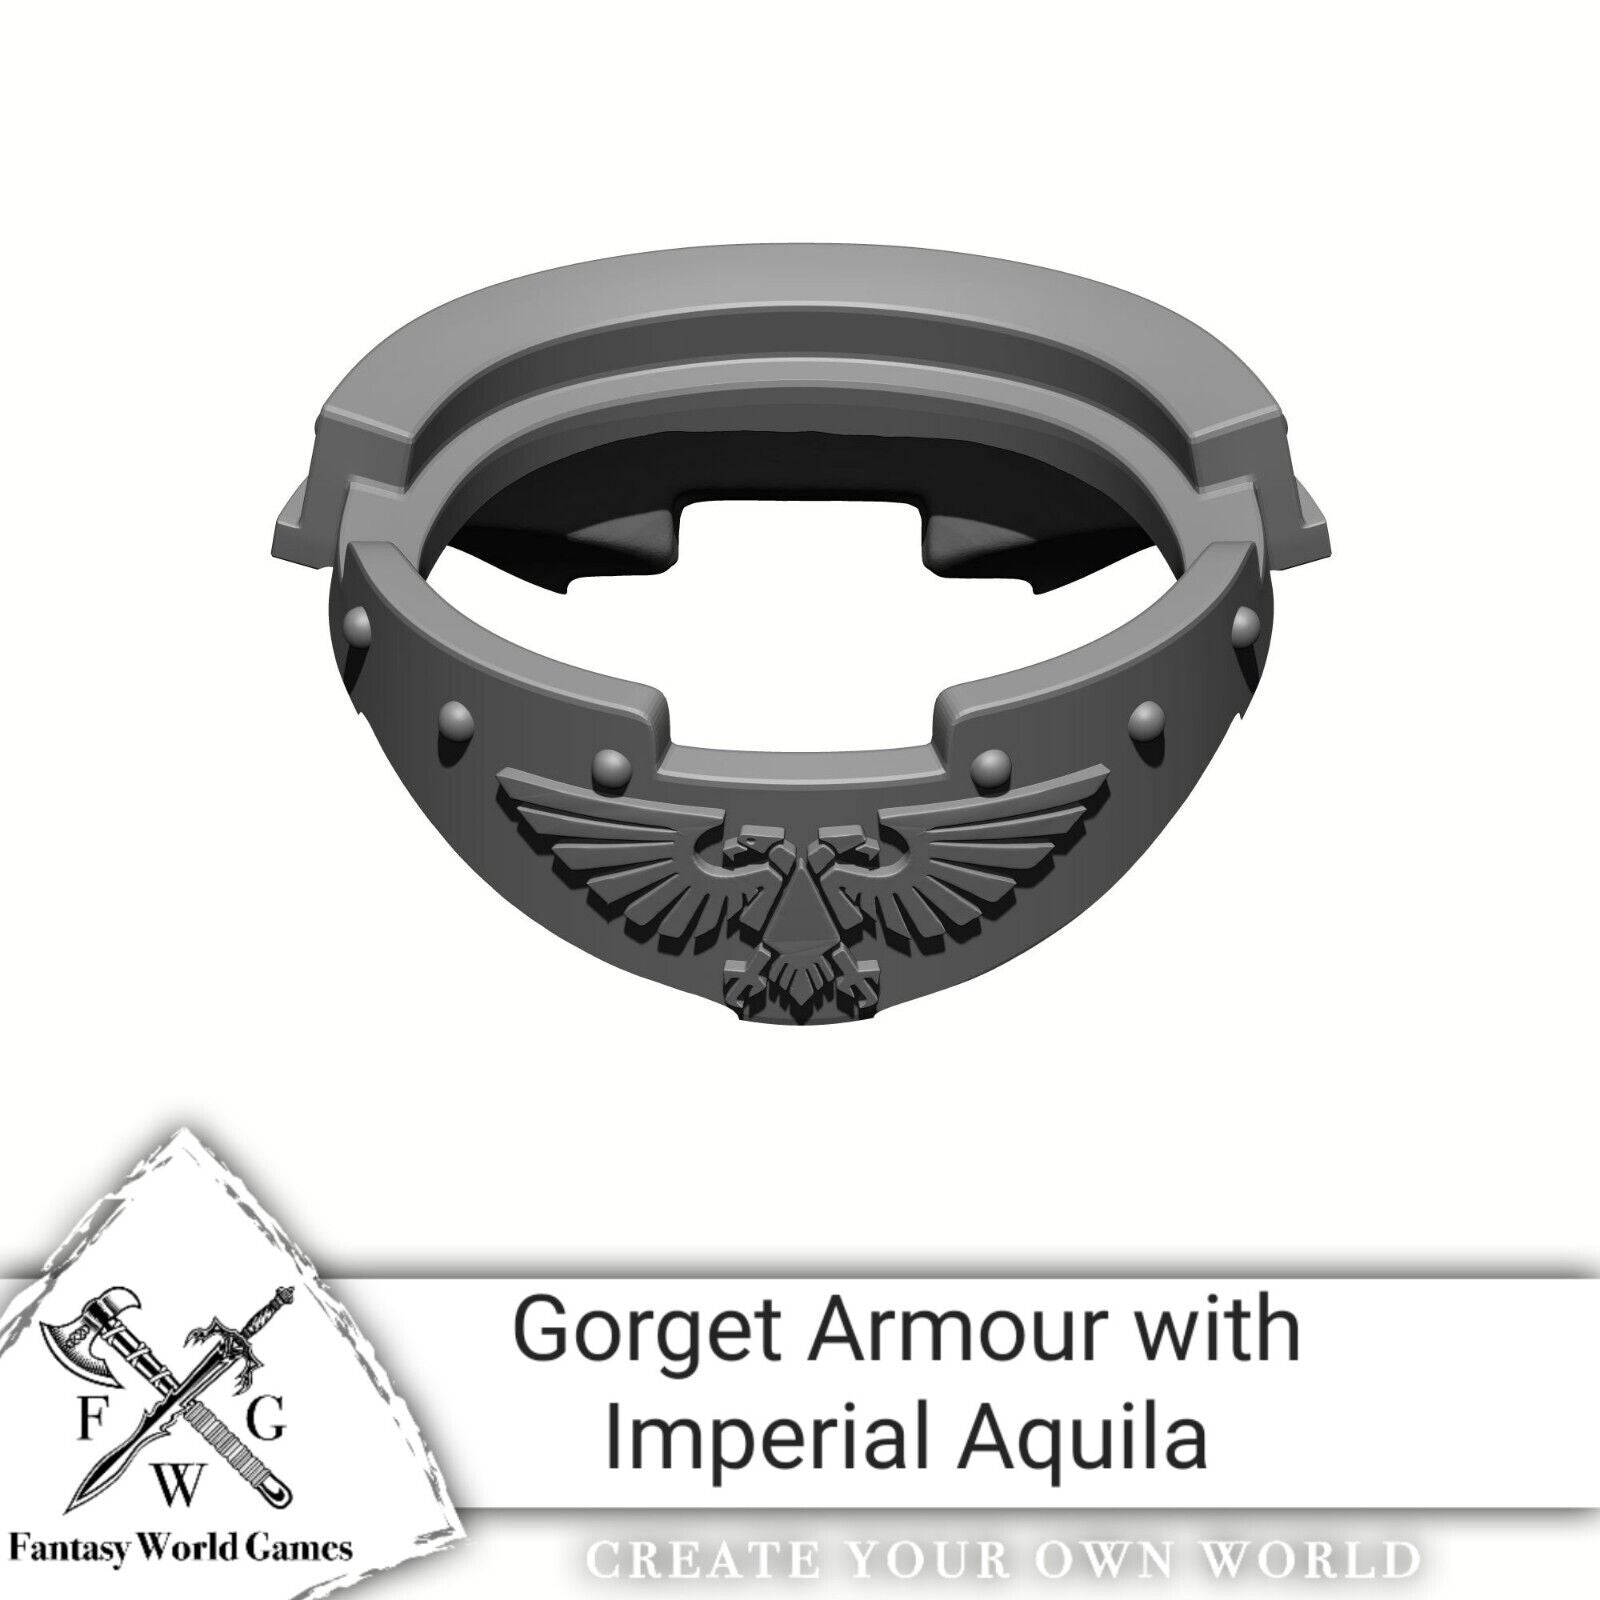 Customize your McFarlane Toys Space Mariine Shoulder Pad with the Armor - Gorget with Imperial Eagle and Rivets